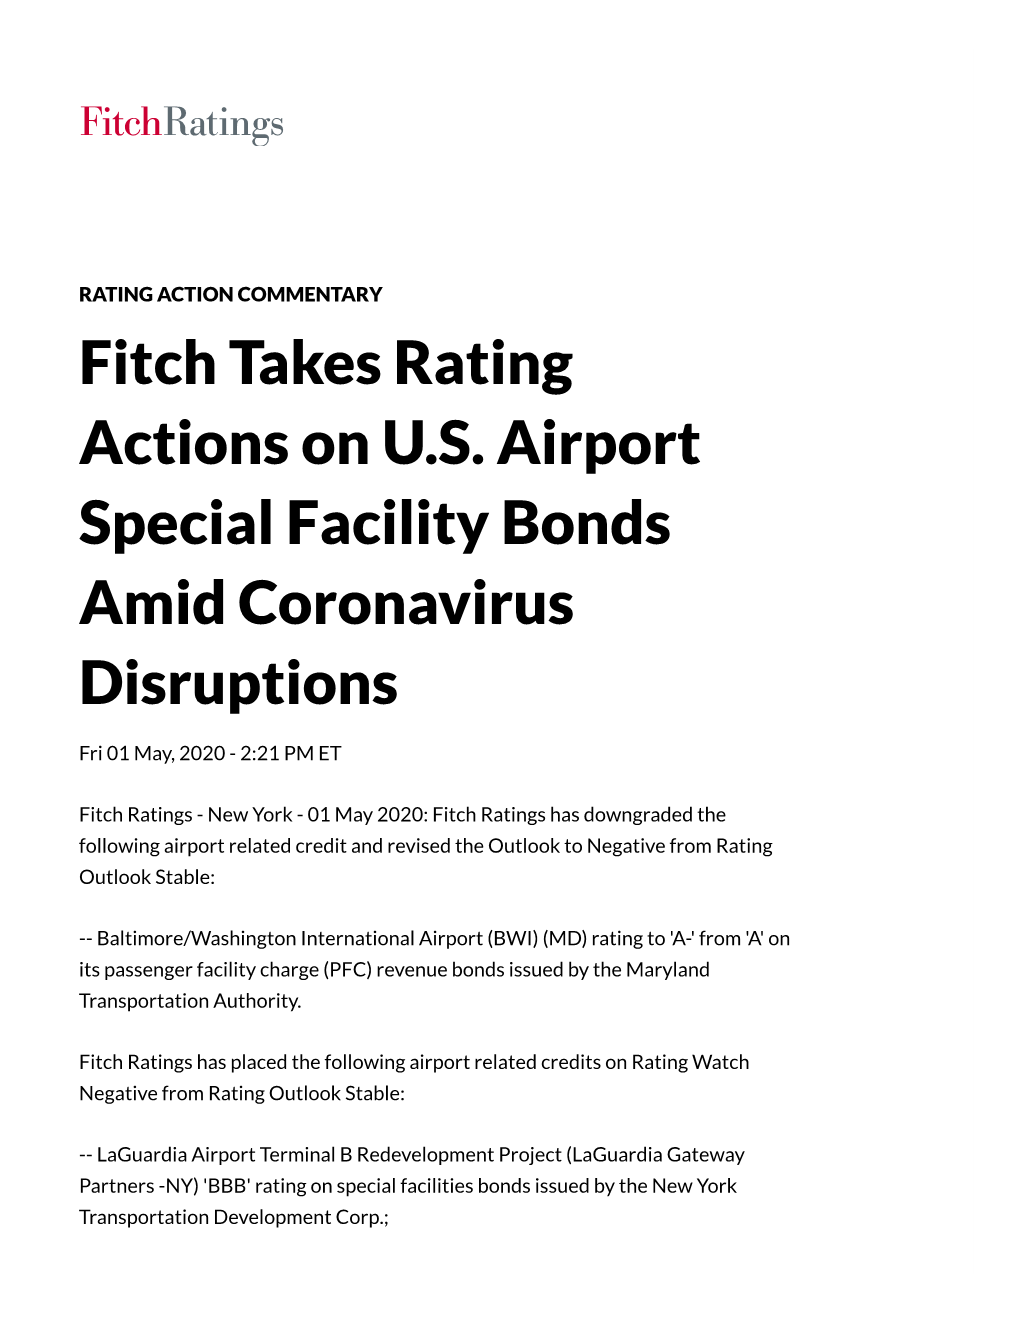 Fitch Takes Rating Actions on U.S. Airport Special Facility Bonds Amid Coronavirus Disruptions